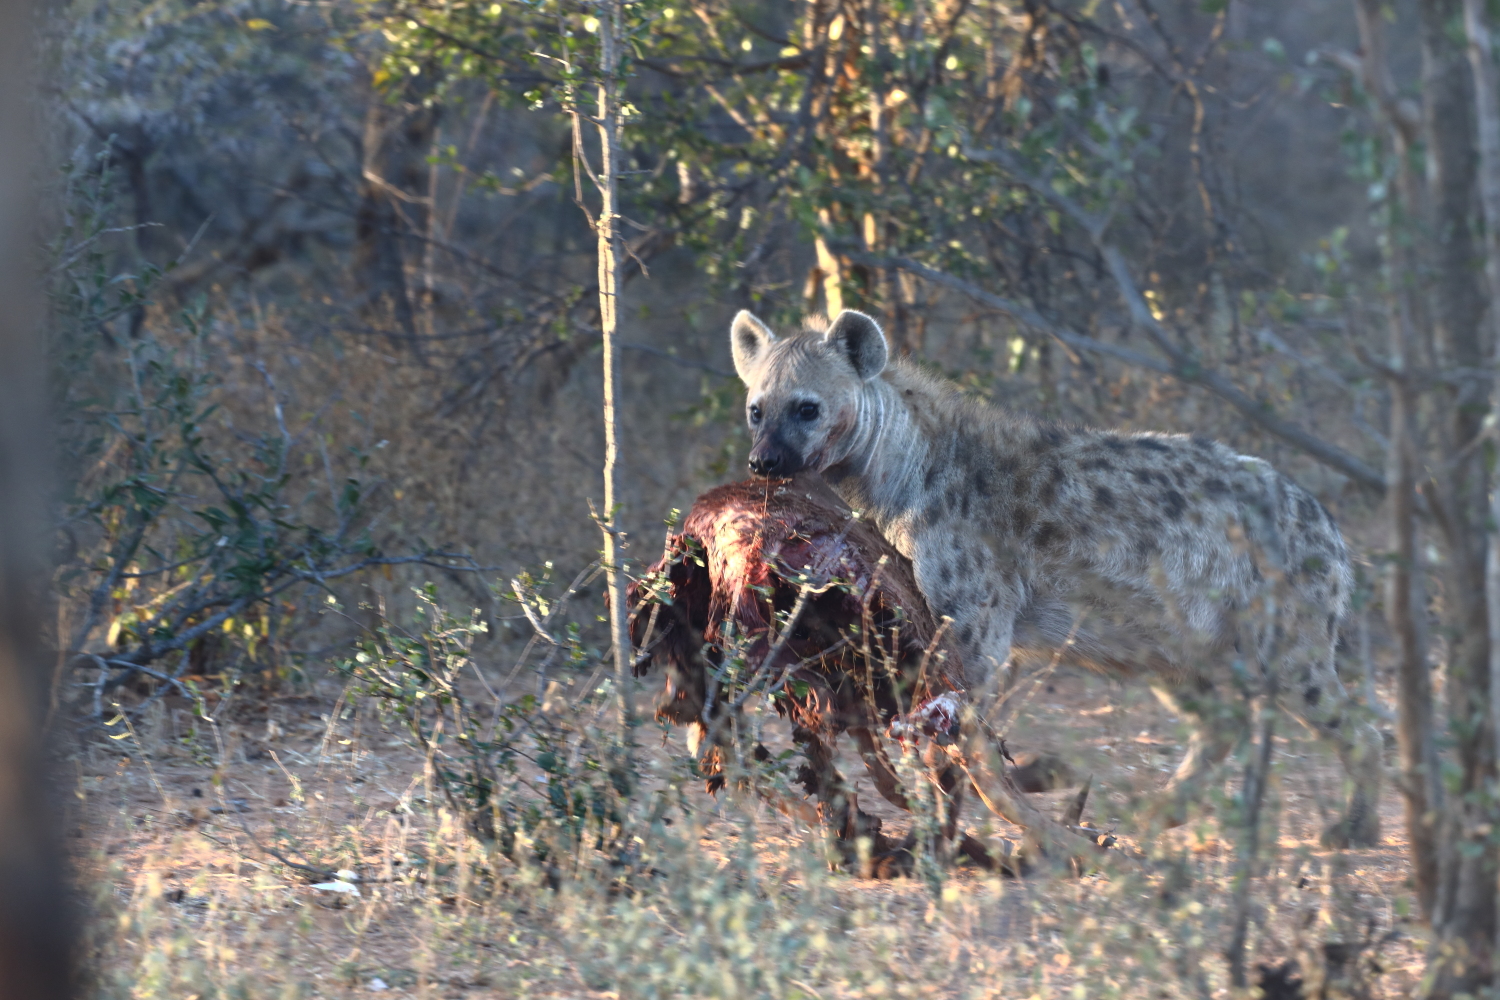 Leopard and Hyenas : A Toxic Friendship